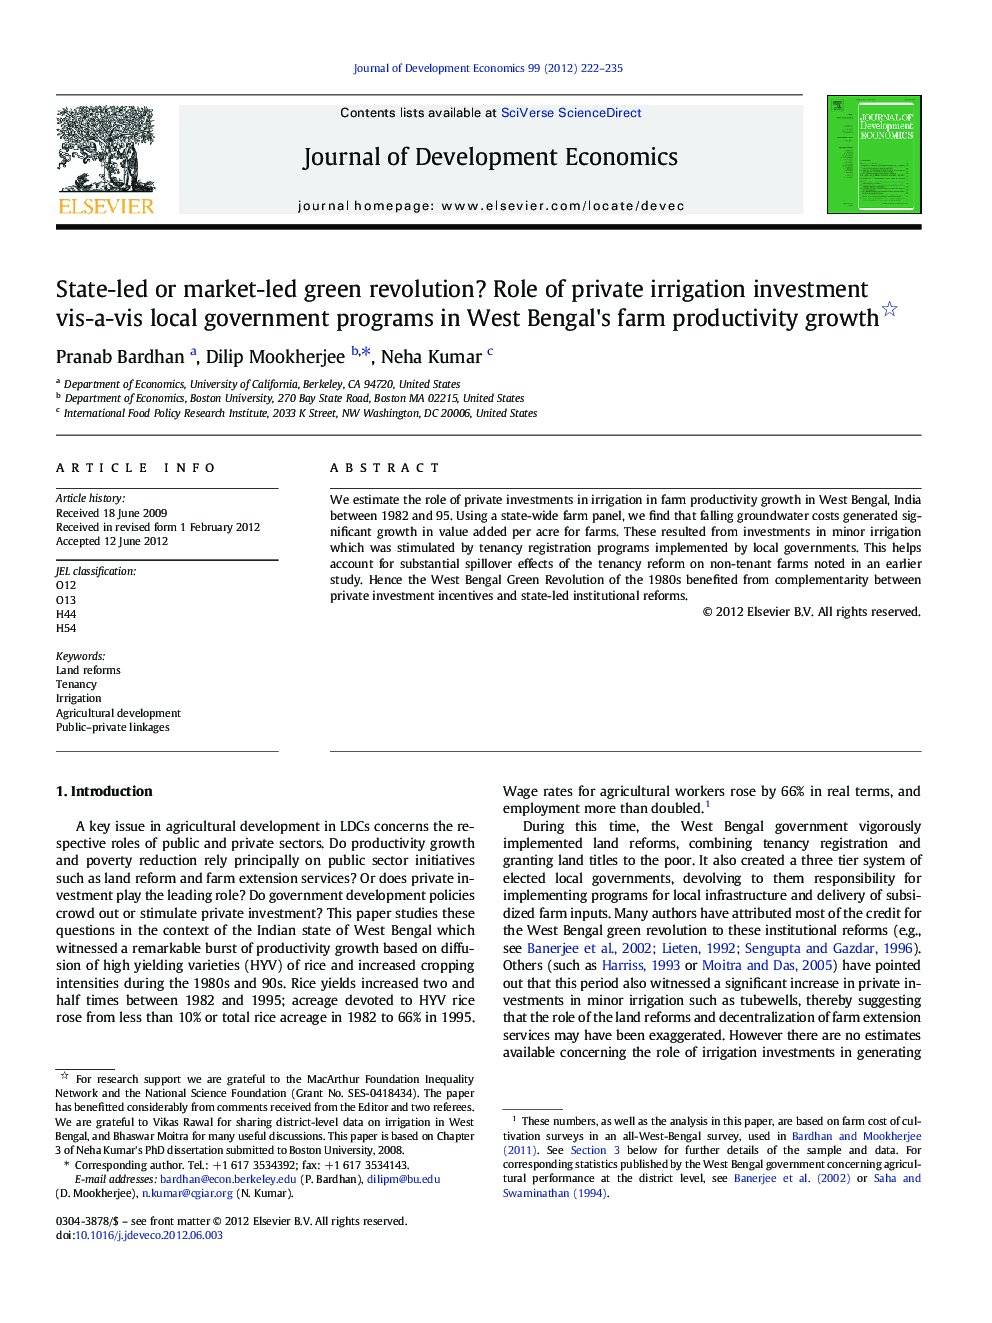 State-led or market-led green revolution? Role of private irrigation investment vis-a-vis local government programs in West Bengal's farm productivity growth